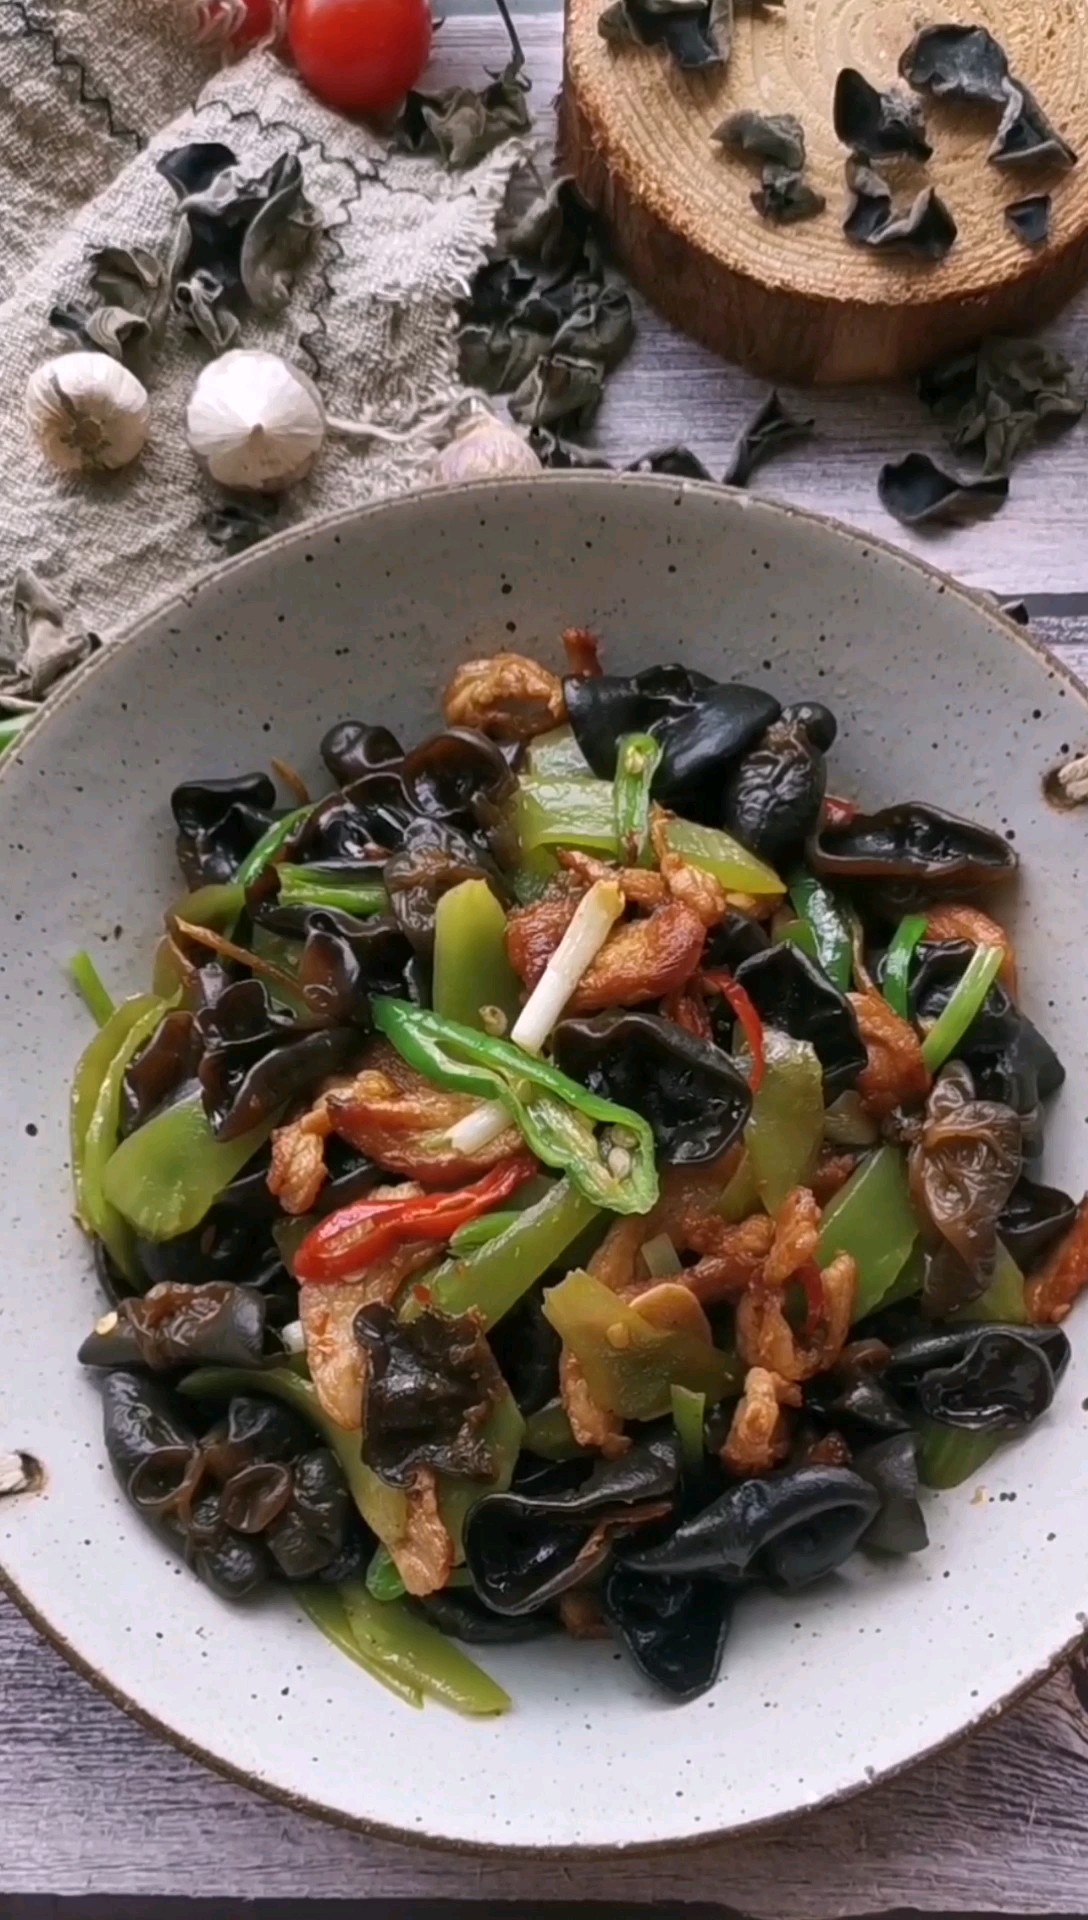 Stir-fried Pork with Fungus and Lettuce